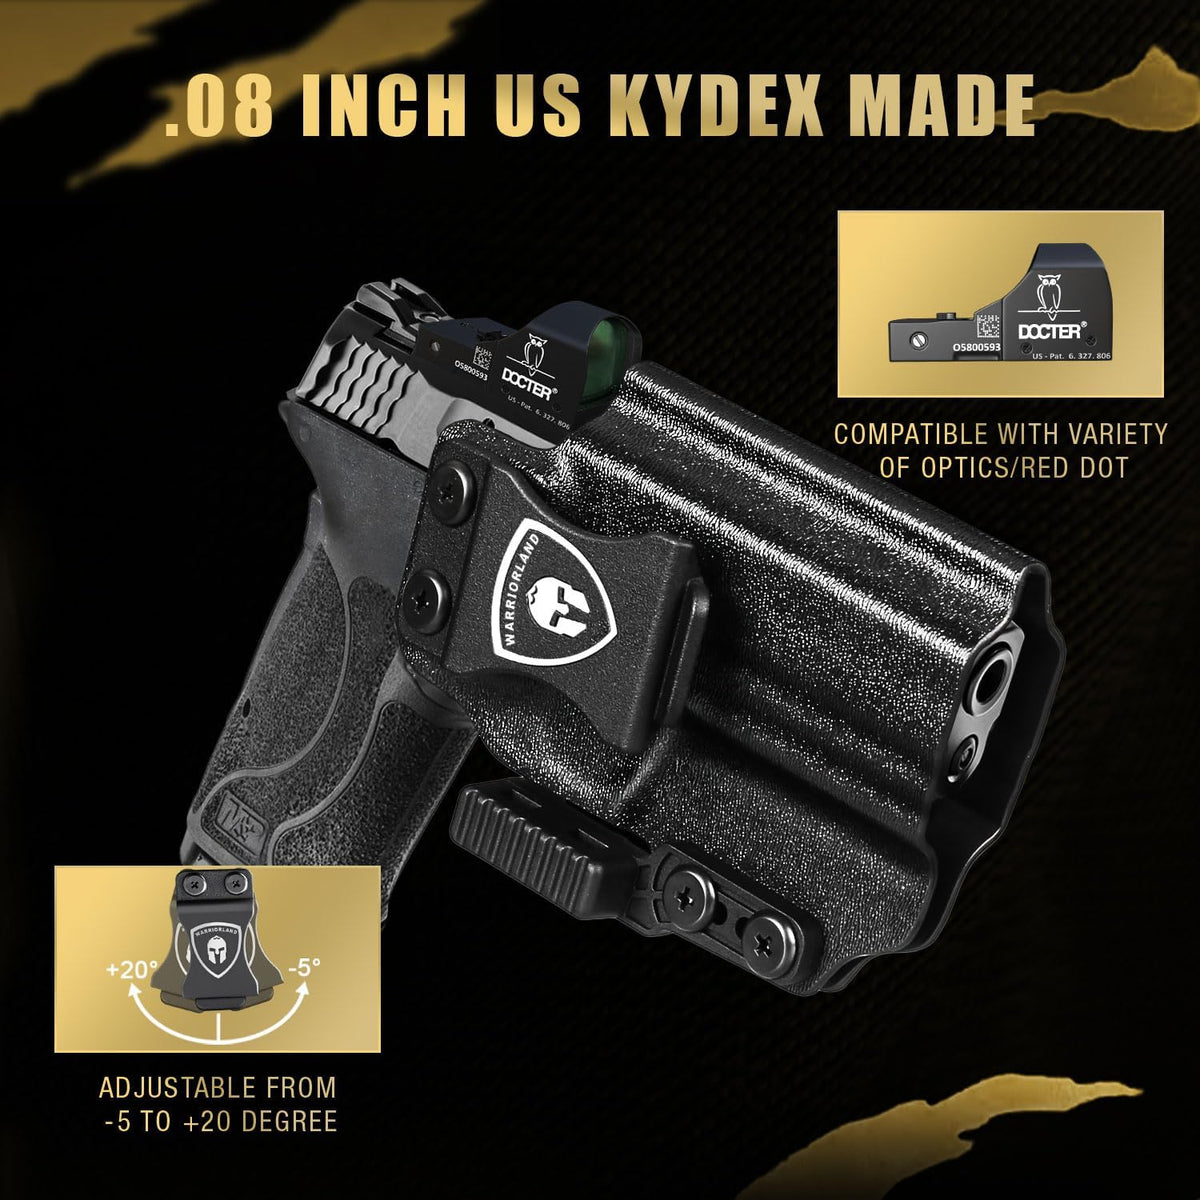 IWB Kydex Holster with Claw Attachment and Optic Cut Fit Smith & Wesson M&P Shield 9mm EZ / .380 EZ Pistol, Inside Waistband Appendix Carry M&P 9mm Shield EZ Holster, Adj. Cant & Retention|WARRIORLAND